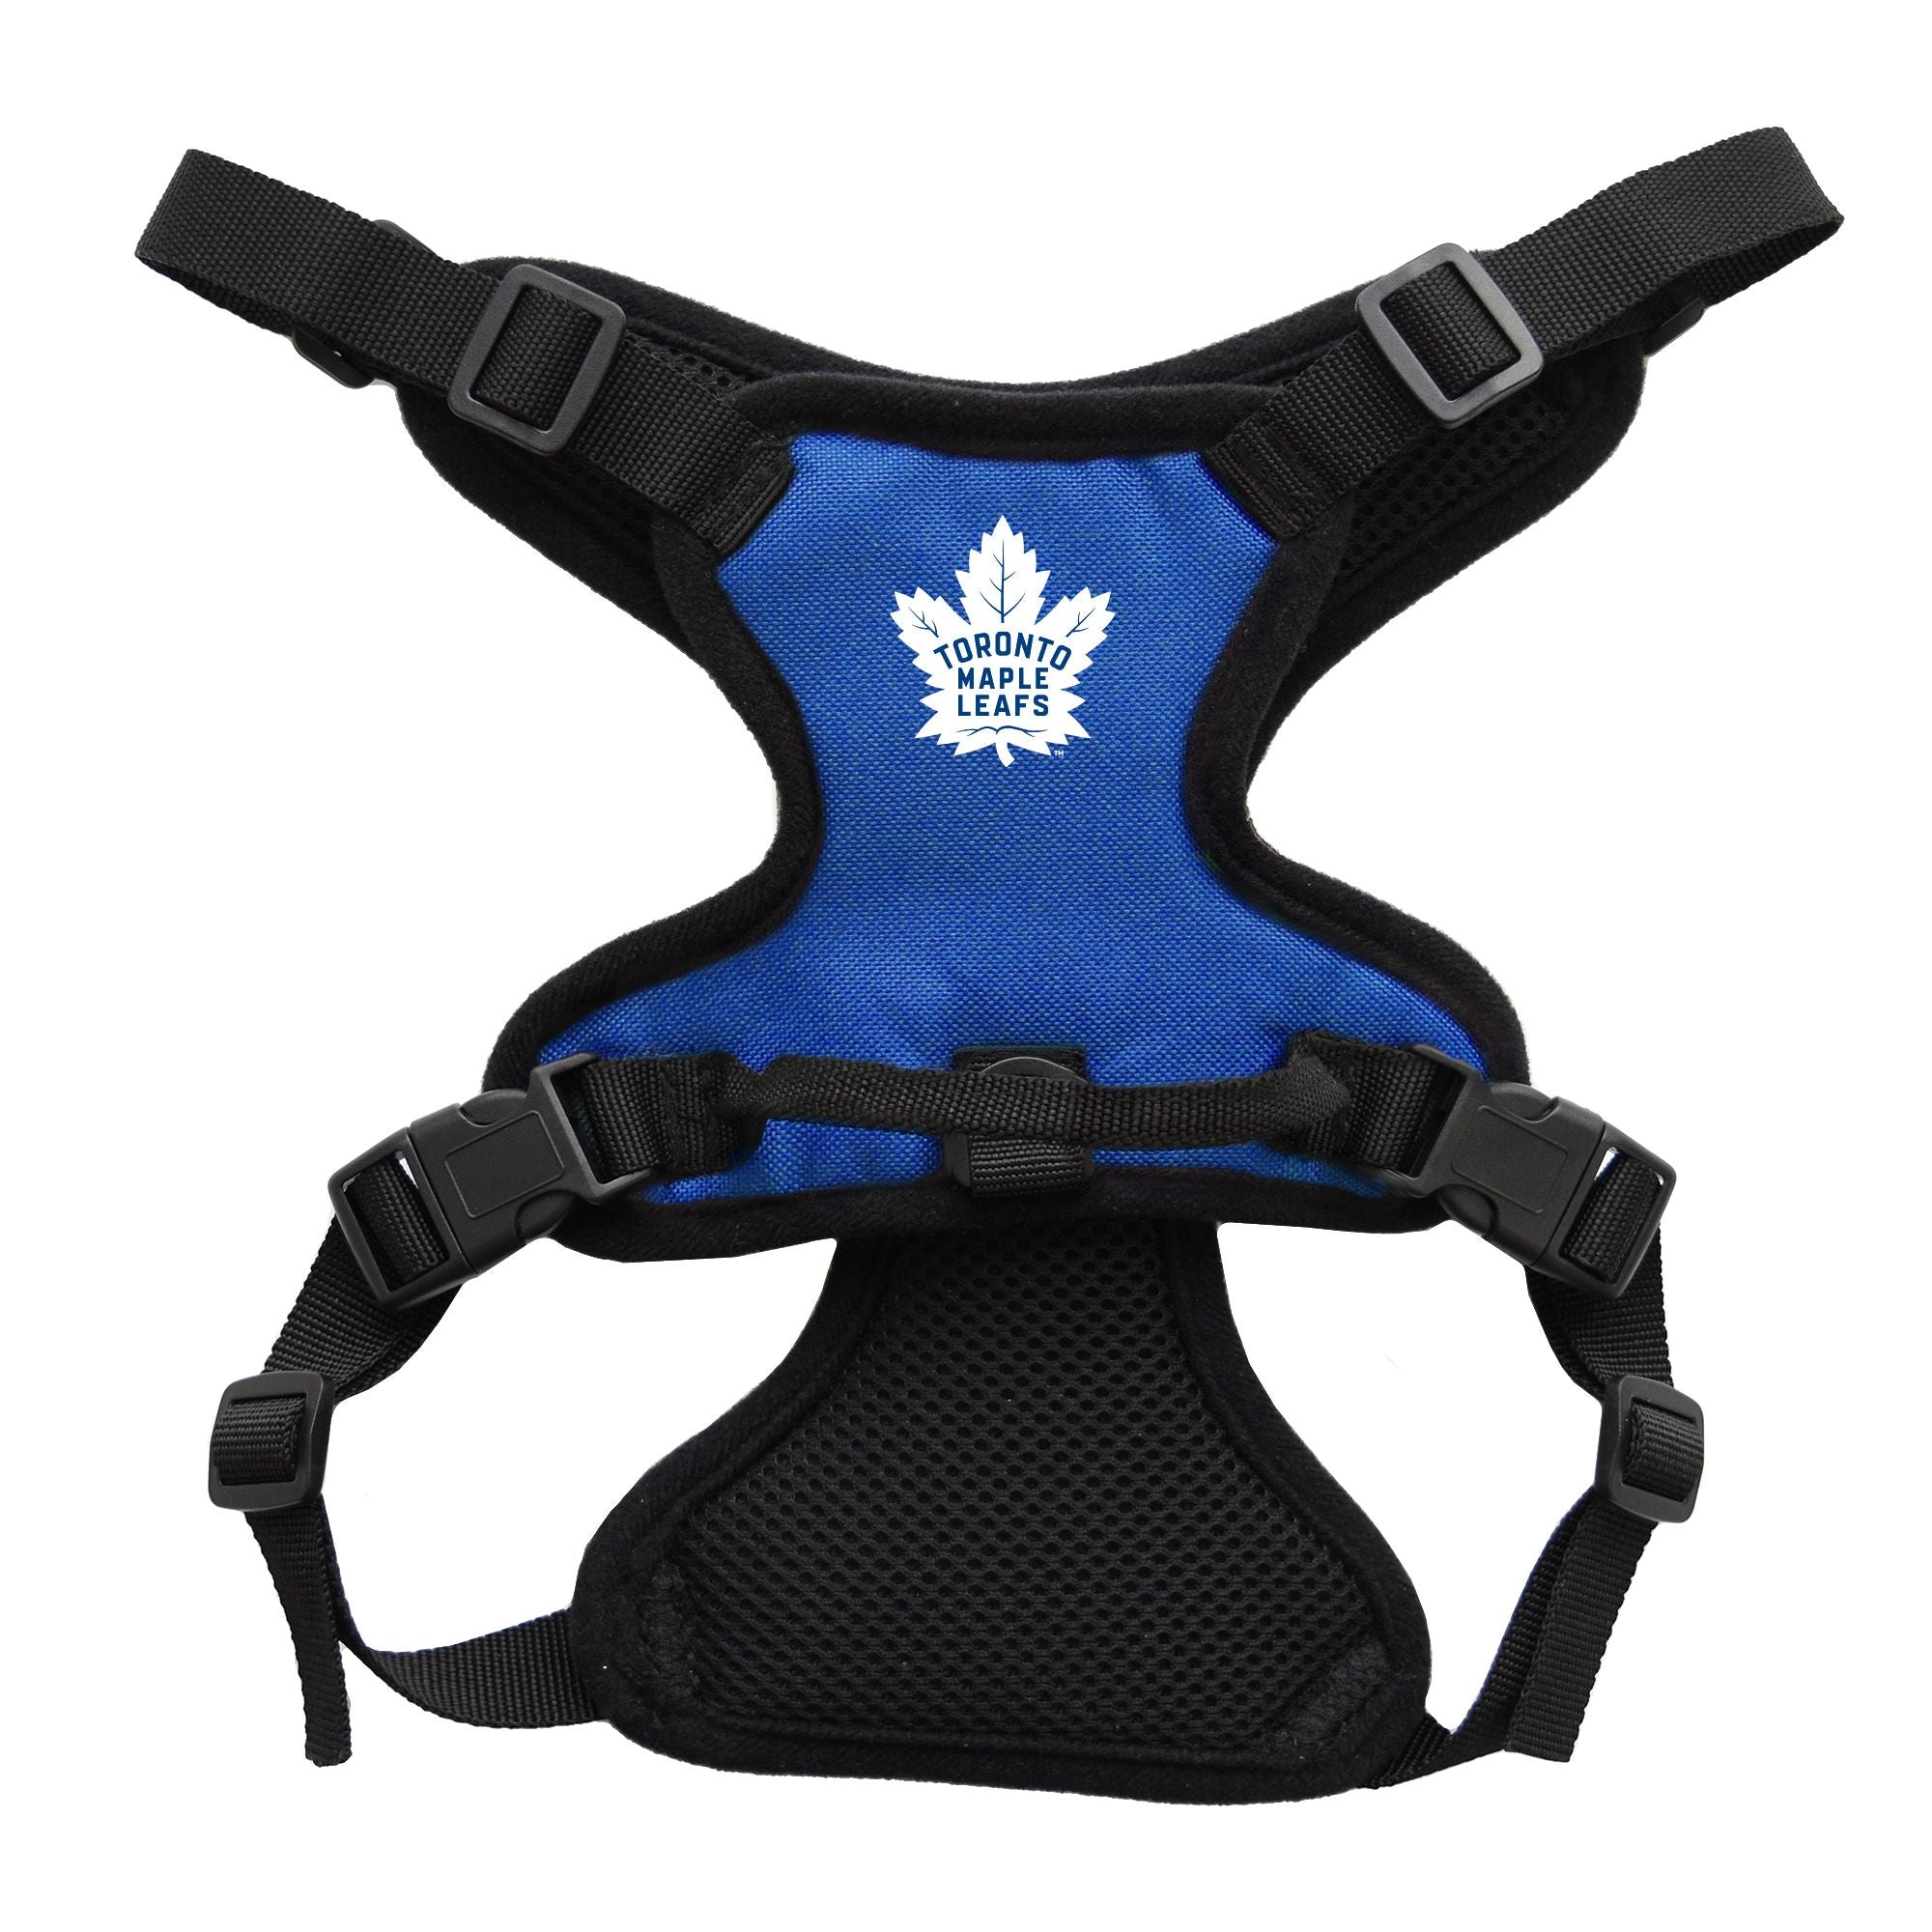 Toronto Maple Leafs Pet Gear, Maple Leafs Collars, Chew Toys, Pet Carriers